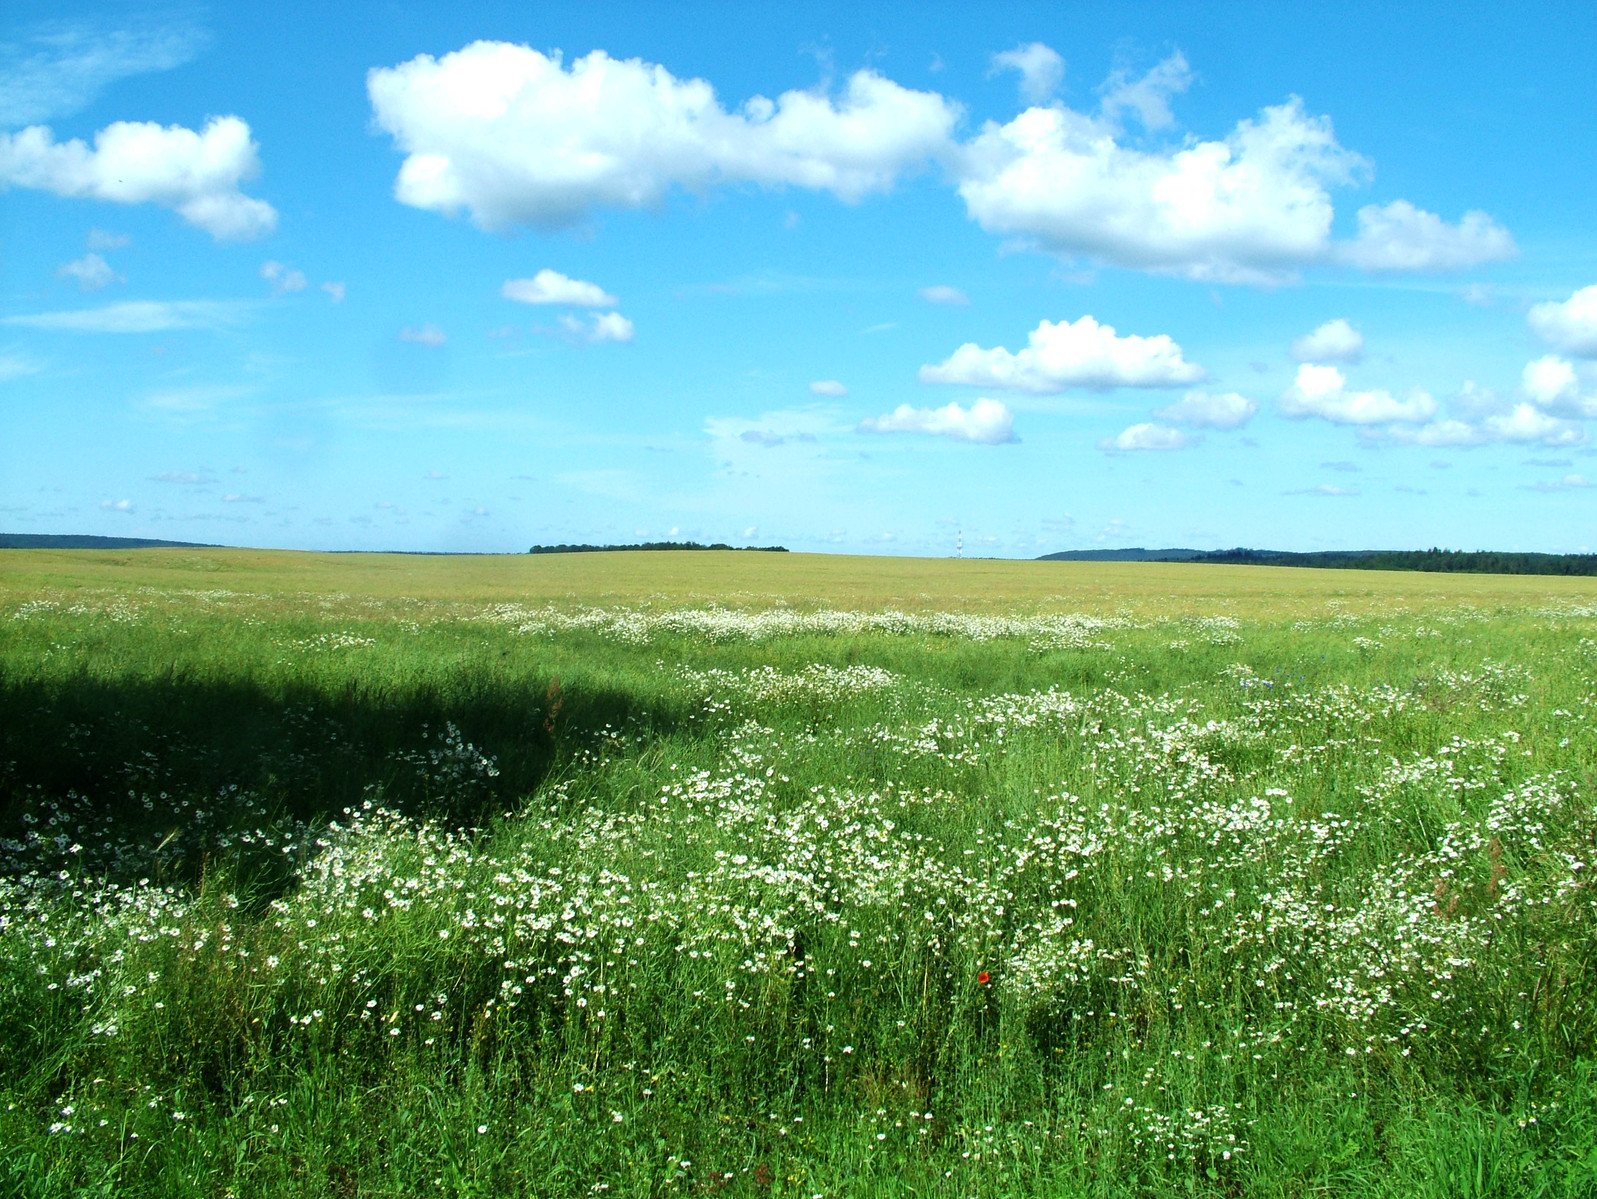 the grassy plain is surrounded by daisies under a blue sky